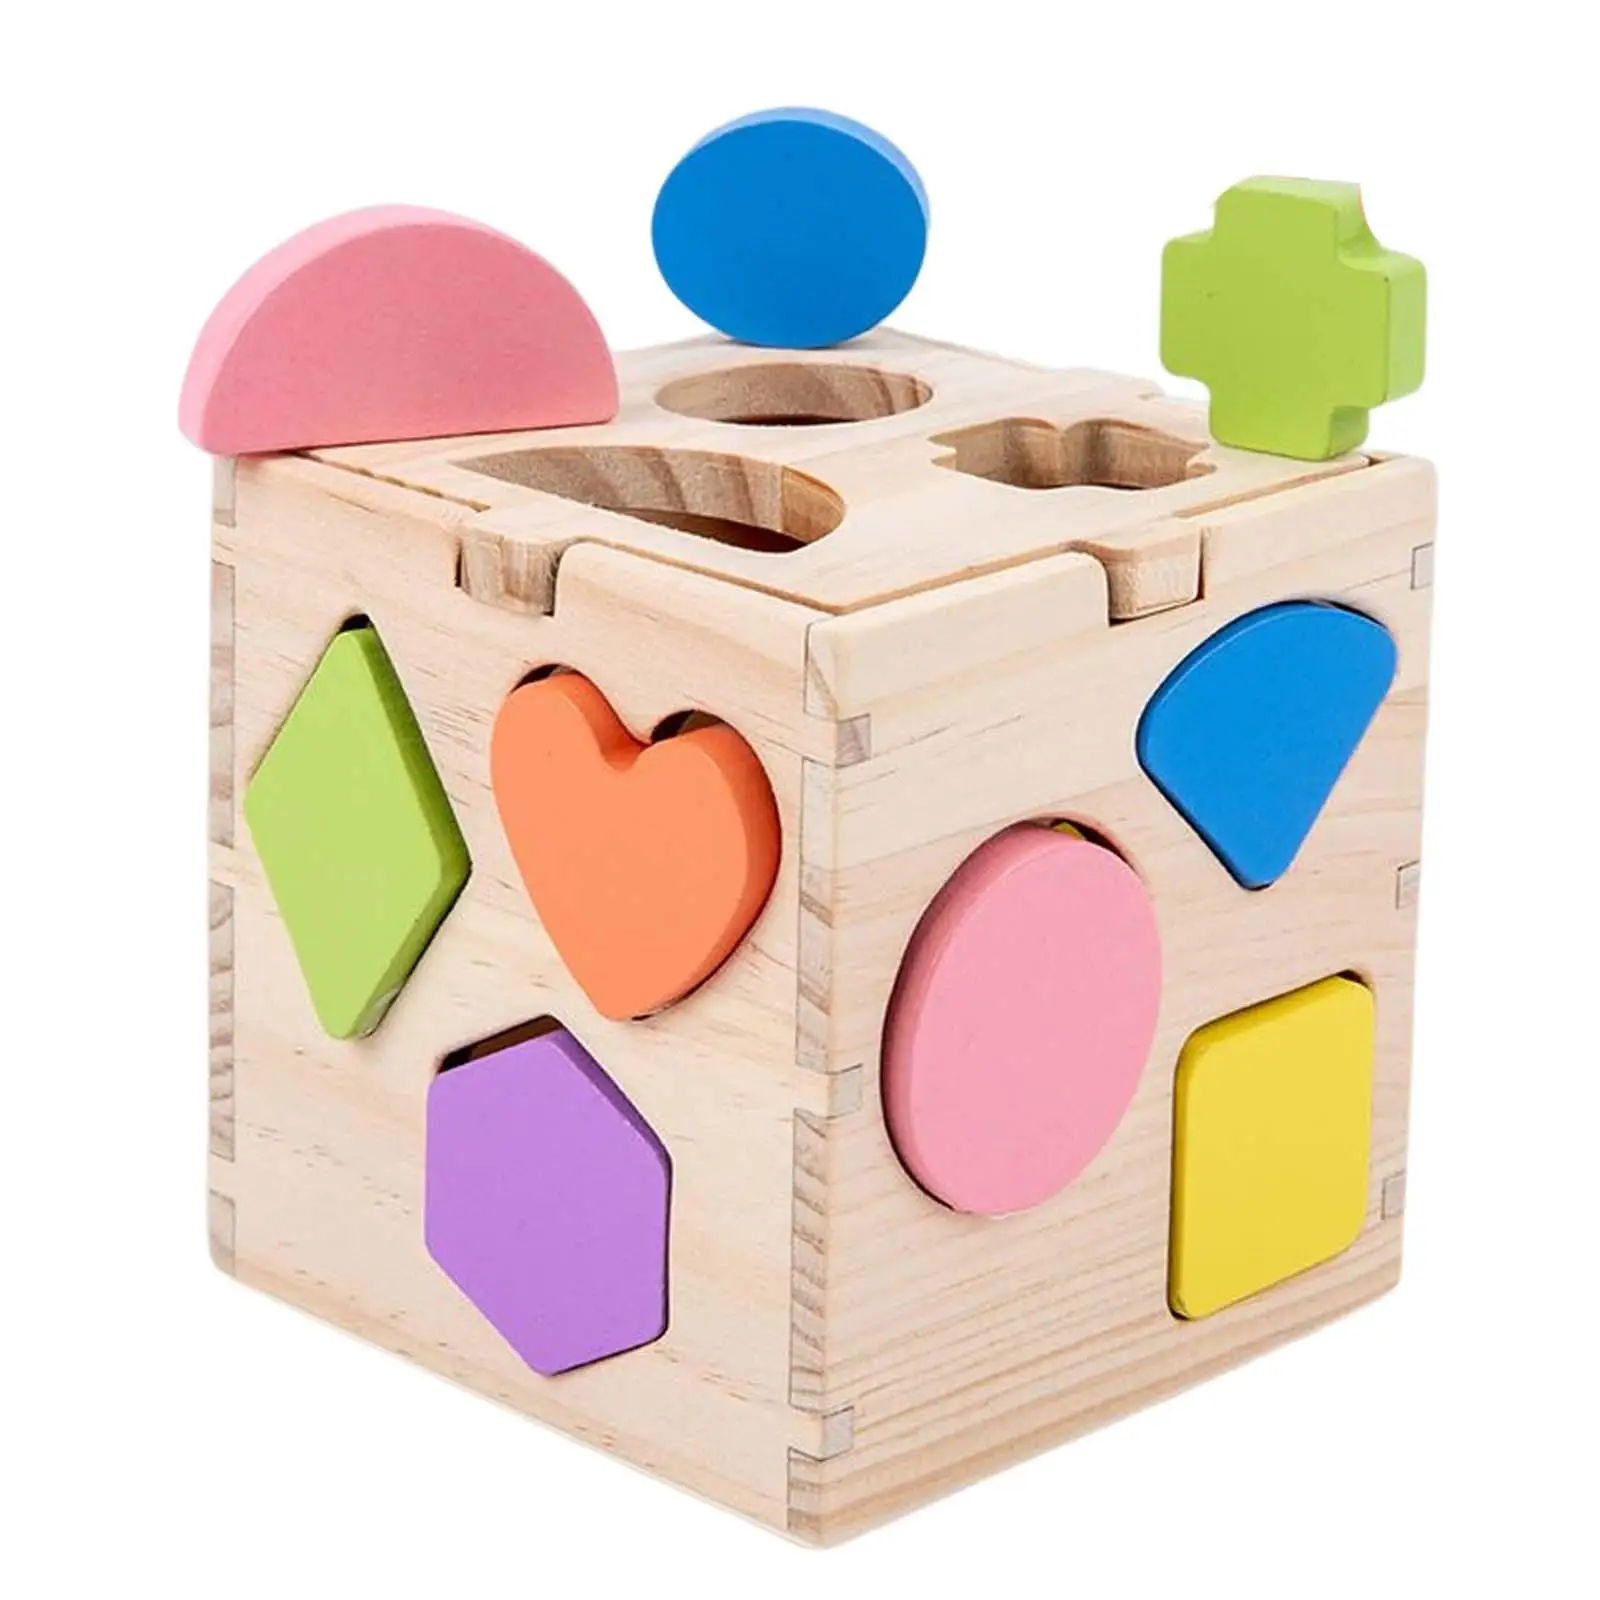 Montessori Wooden Block Toys Parent Child Interactive Toys Geometric Shapes Toy Puzzles Learning Shape for Boy Birthday Gifts